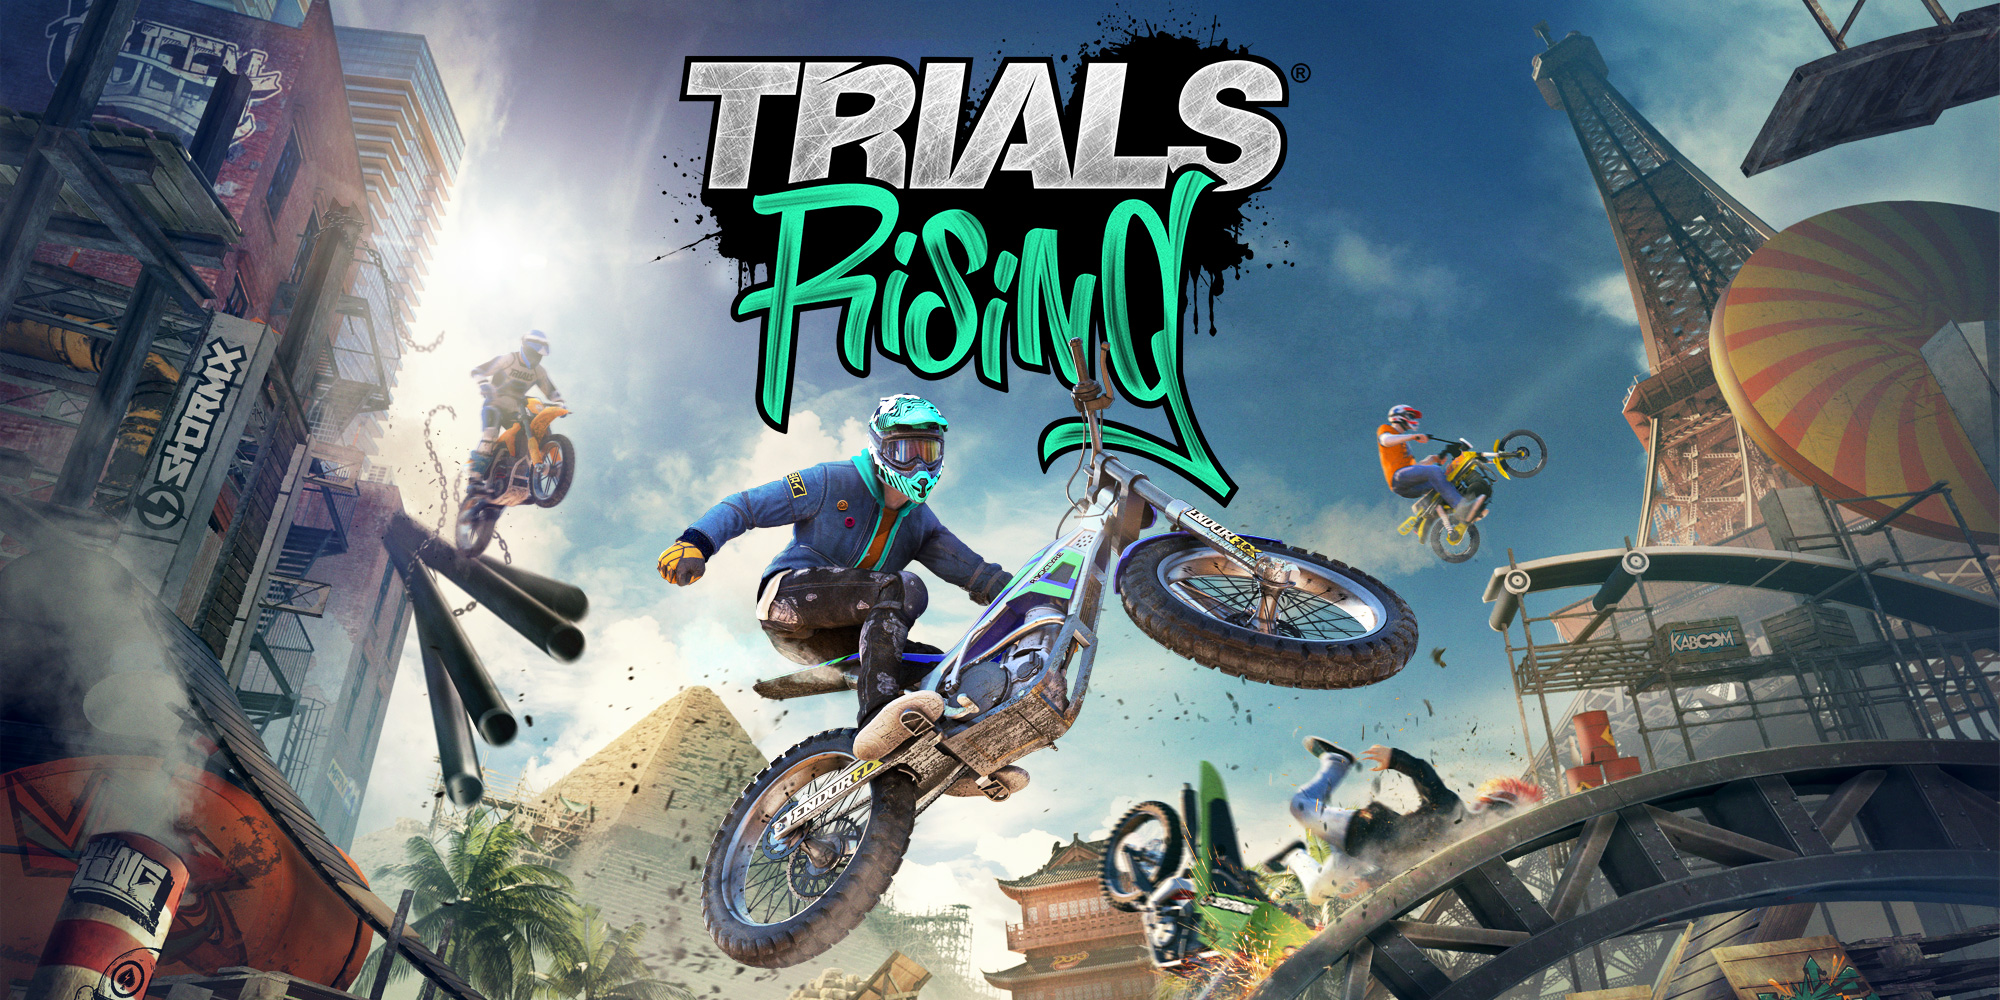 Trials Rising / Online Uplay / Full Access / Warranty / Inactive / Gift